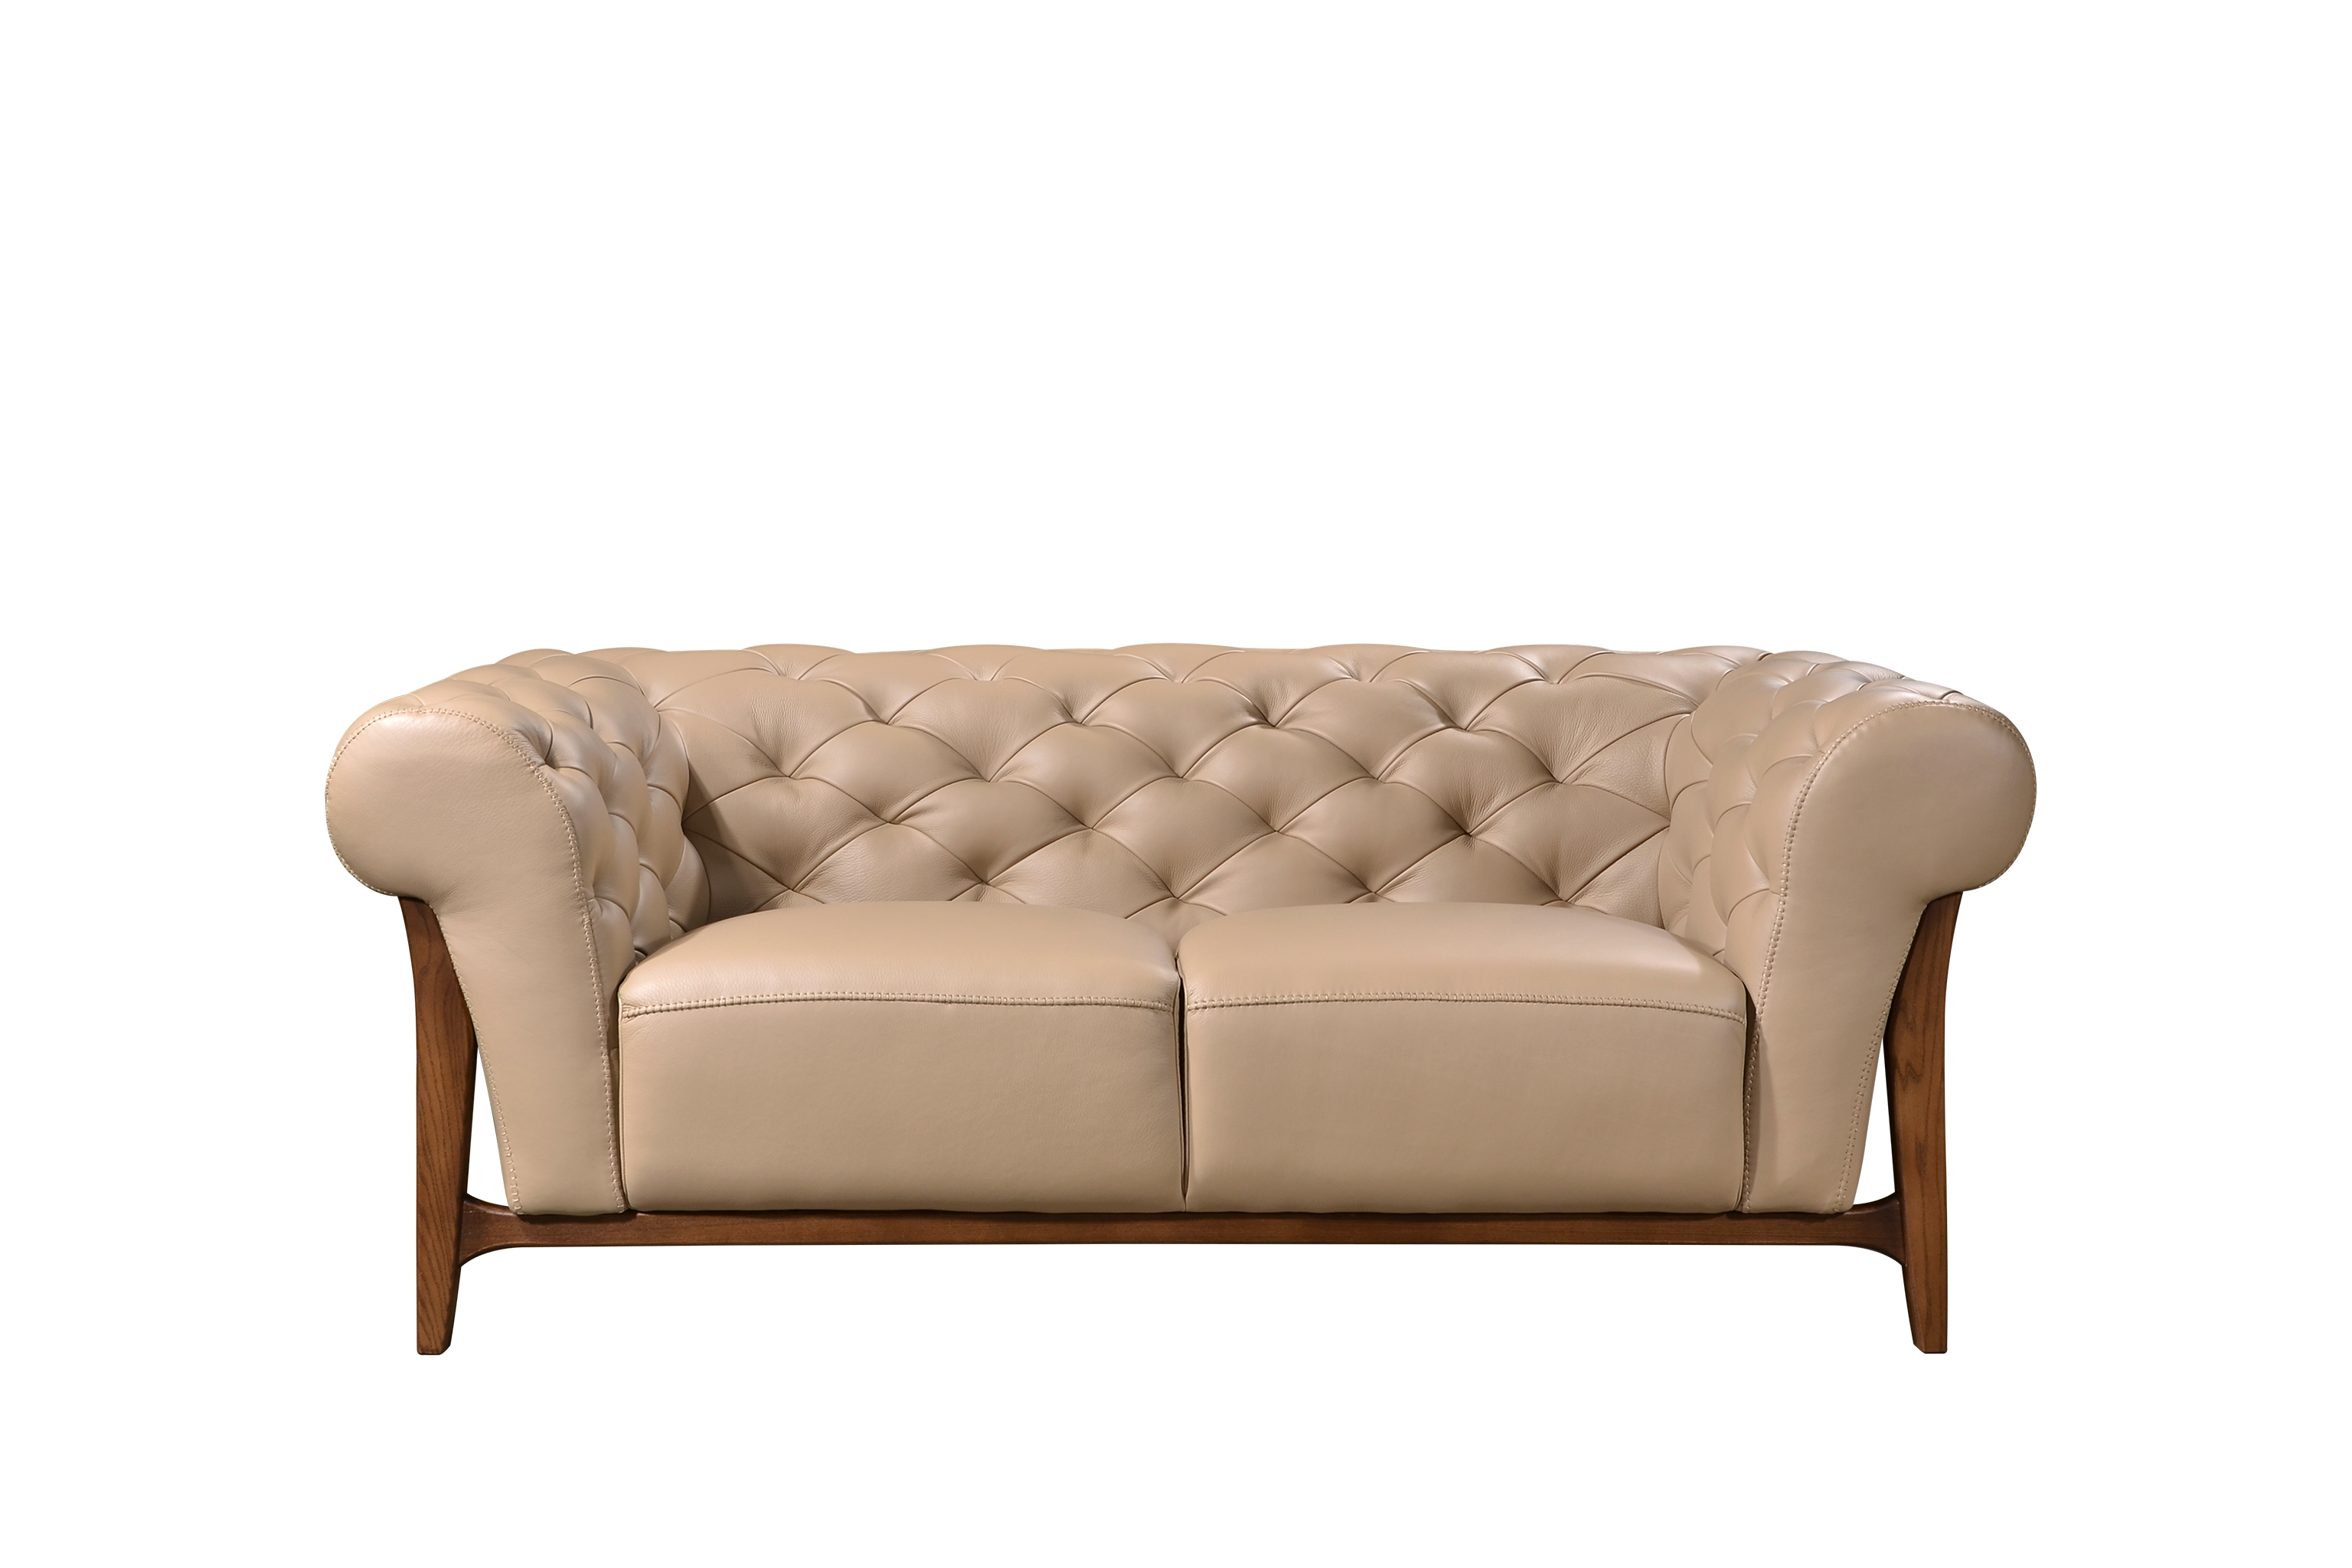 VINCENZO 2 Seater Sofa In Leather By Castilla